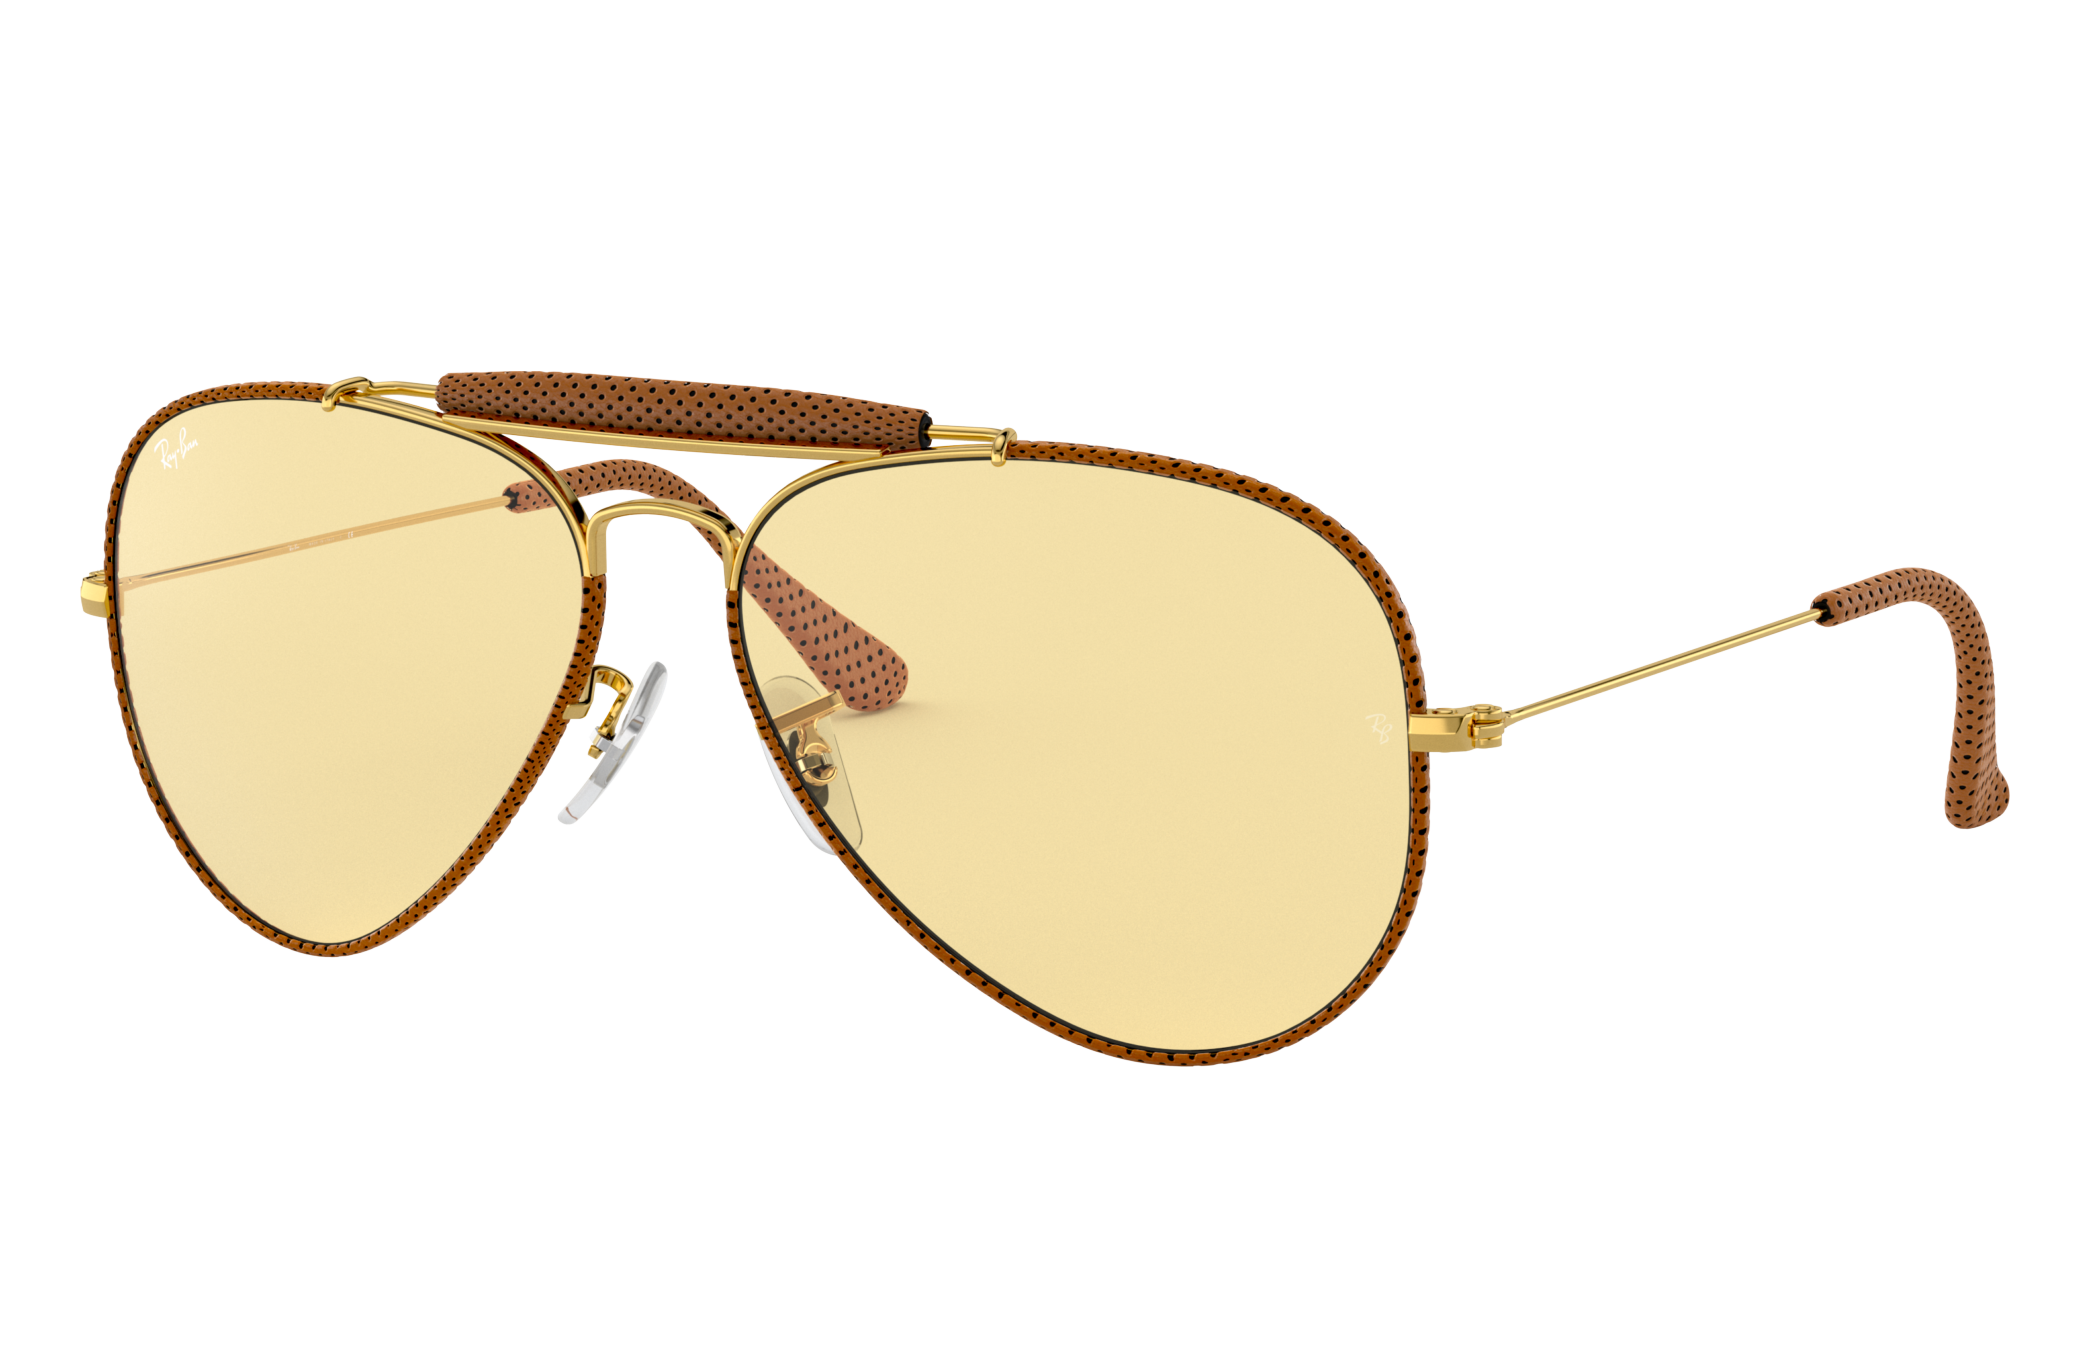 Aviator Craft Sunglasses in Light Brown and Yellow | Ray-Ban®